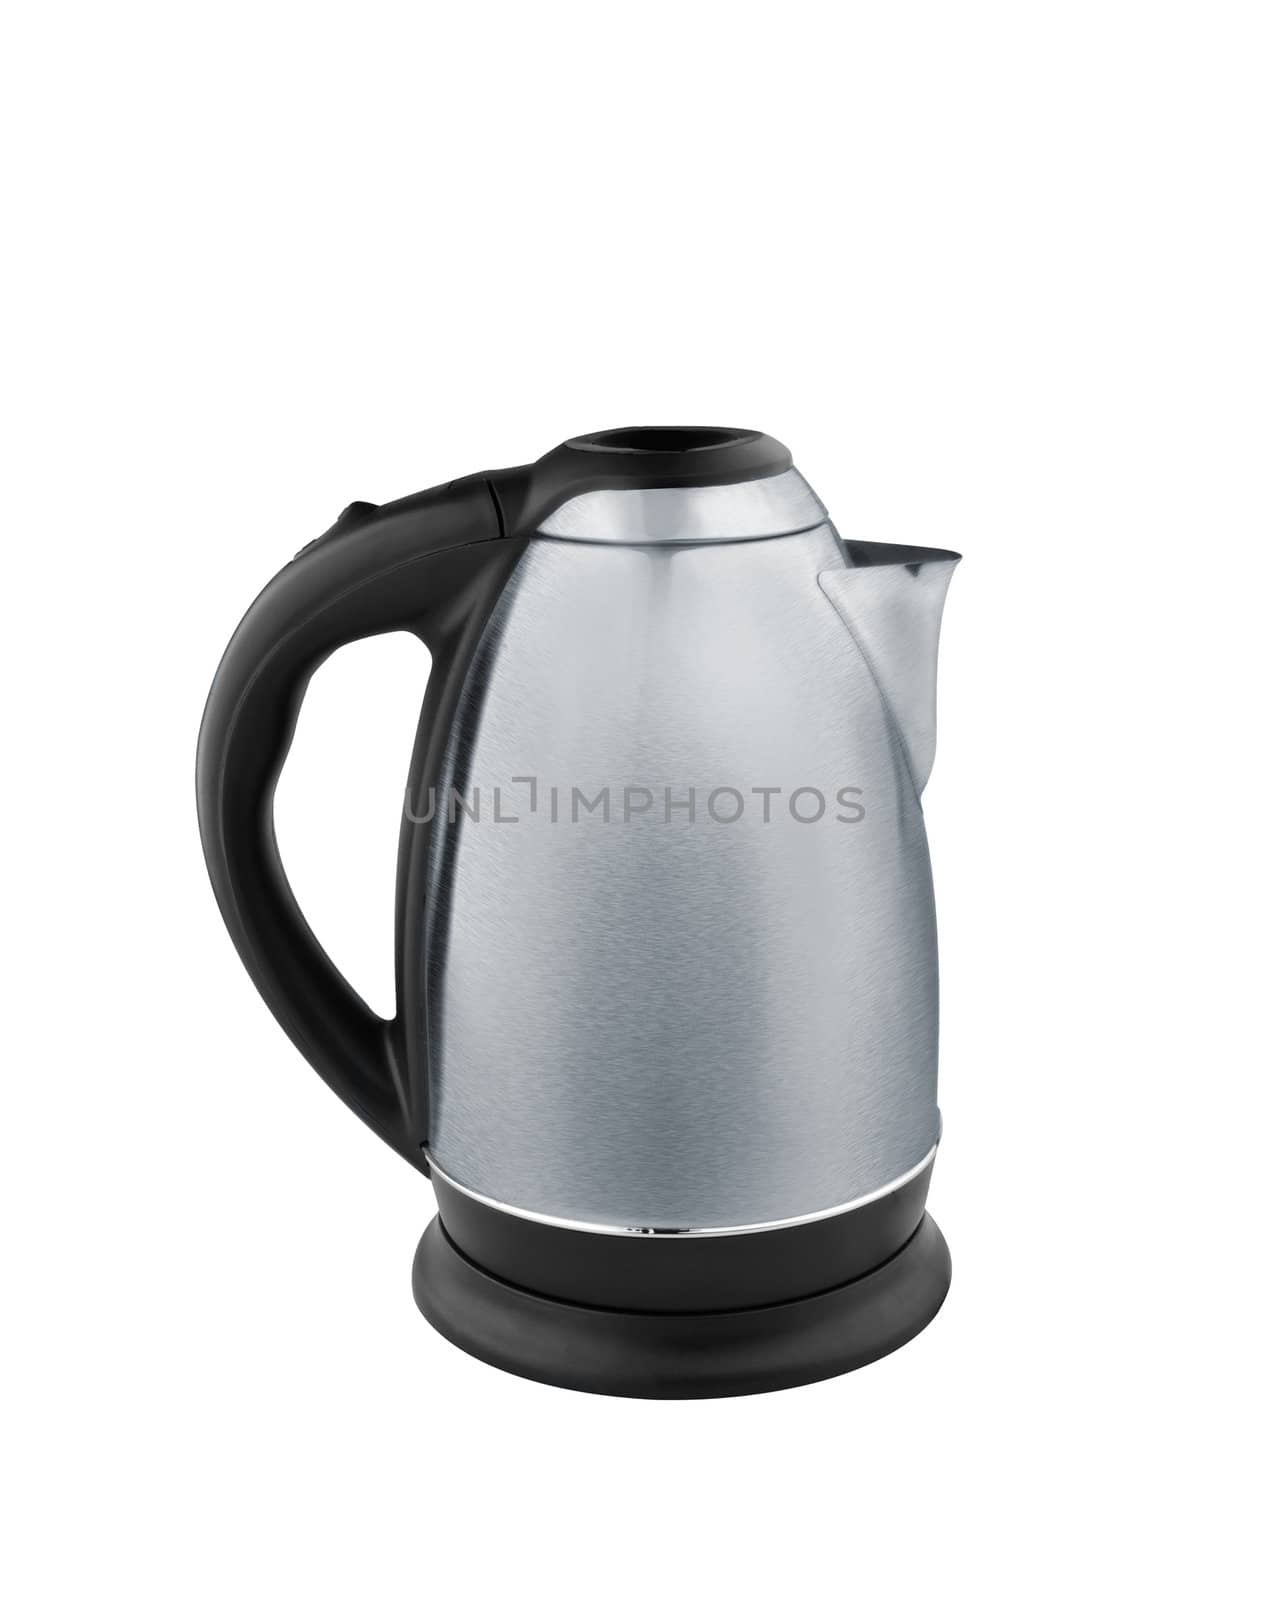 Stainless steel electric kettle isolated on white background with clipping path